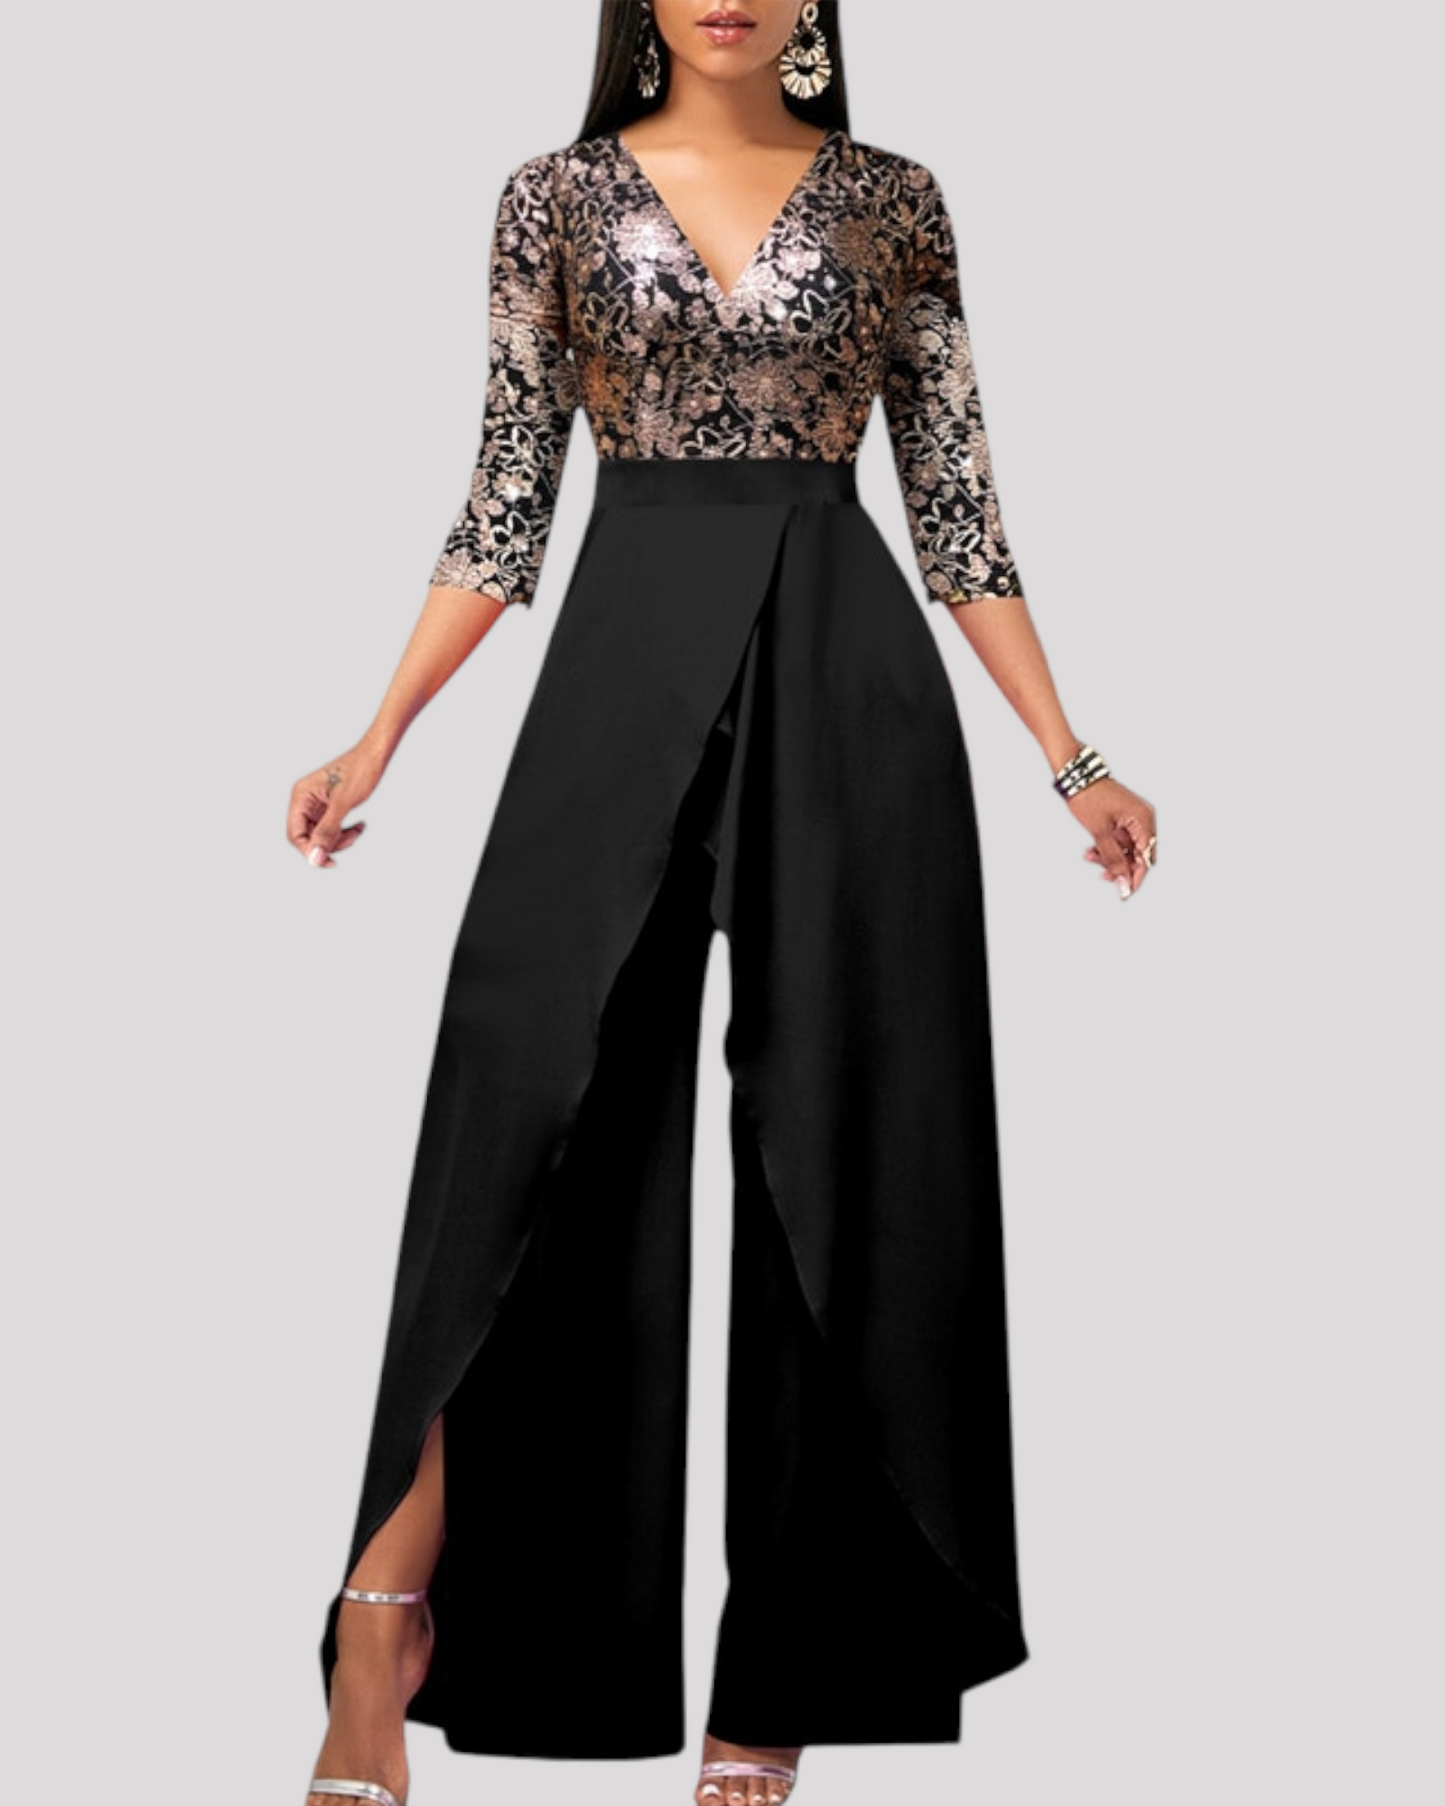 V Neck Women's Pants Suit with 3/4 Sleeves